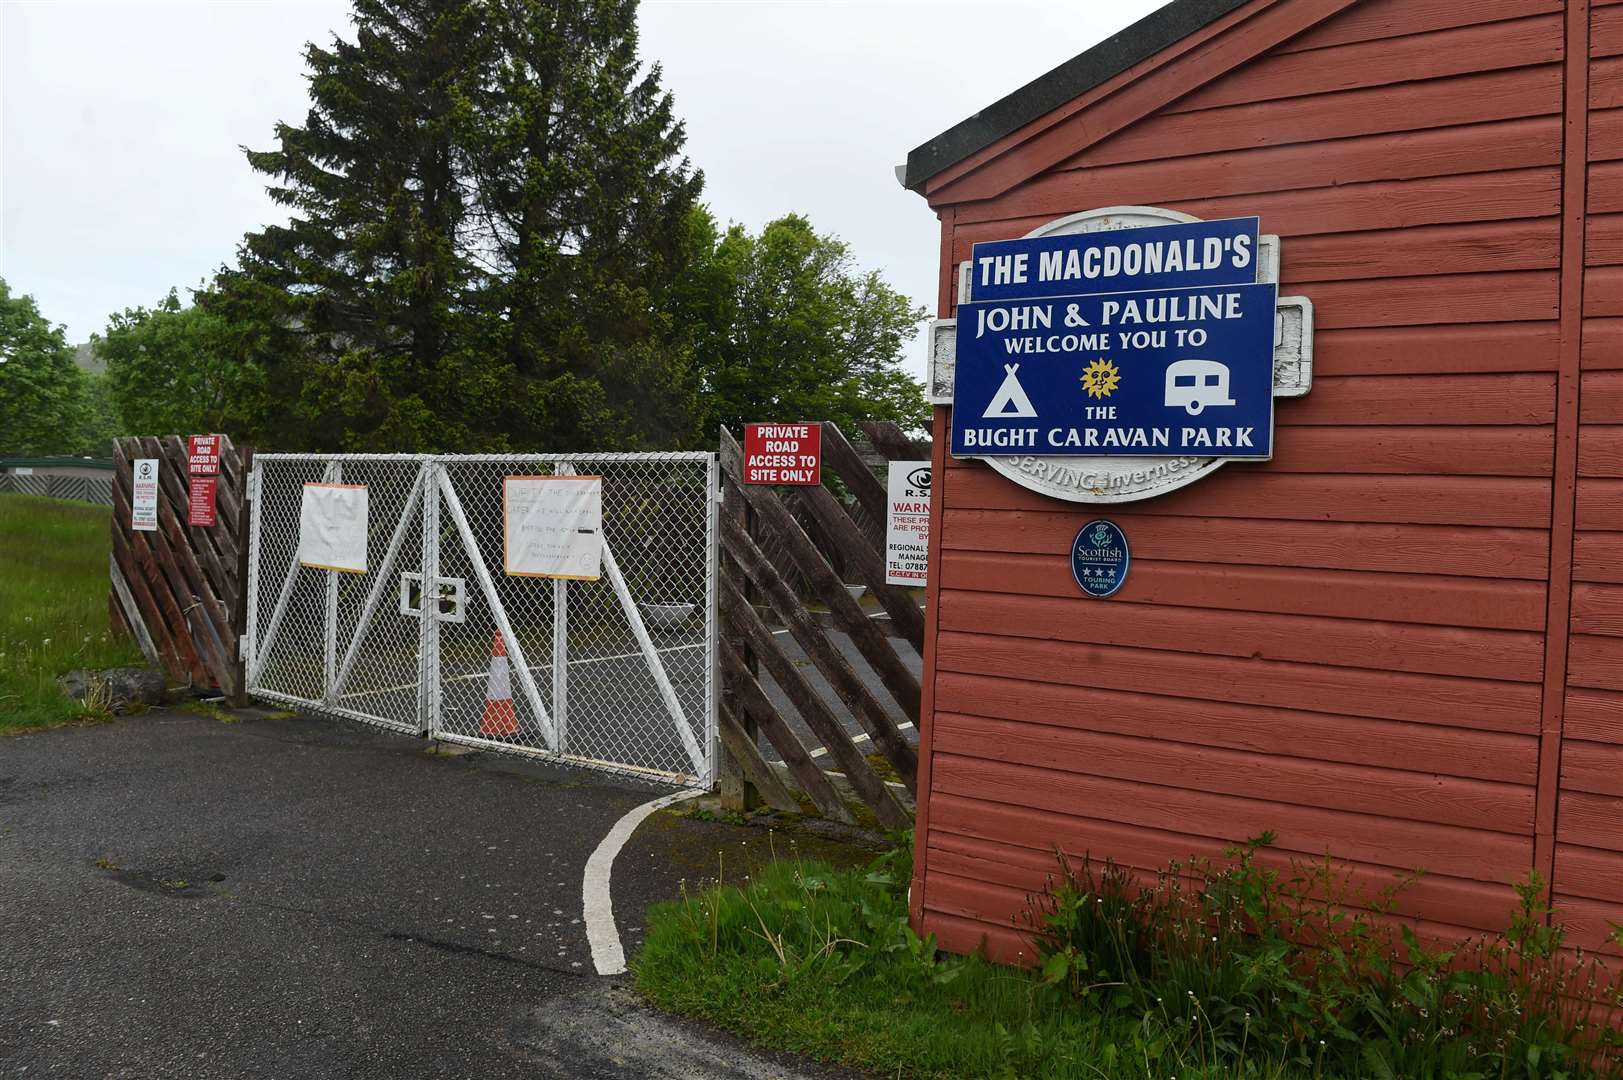 Bught Caravan Park and Campsite in Inverness could see healthy bookings if and when lockdown holidaying restrictions are lifted.